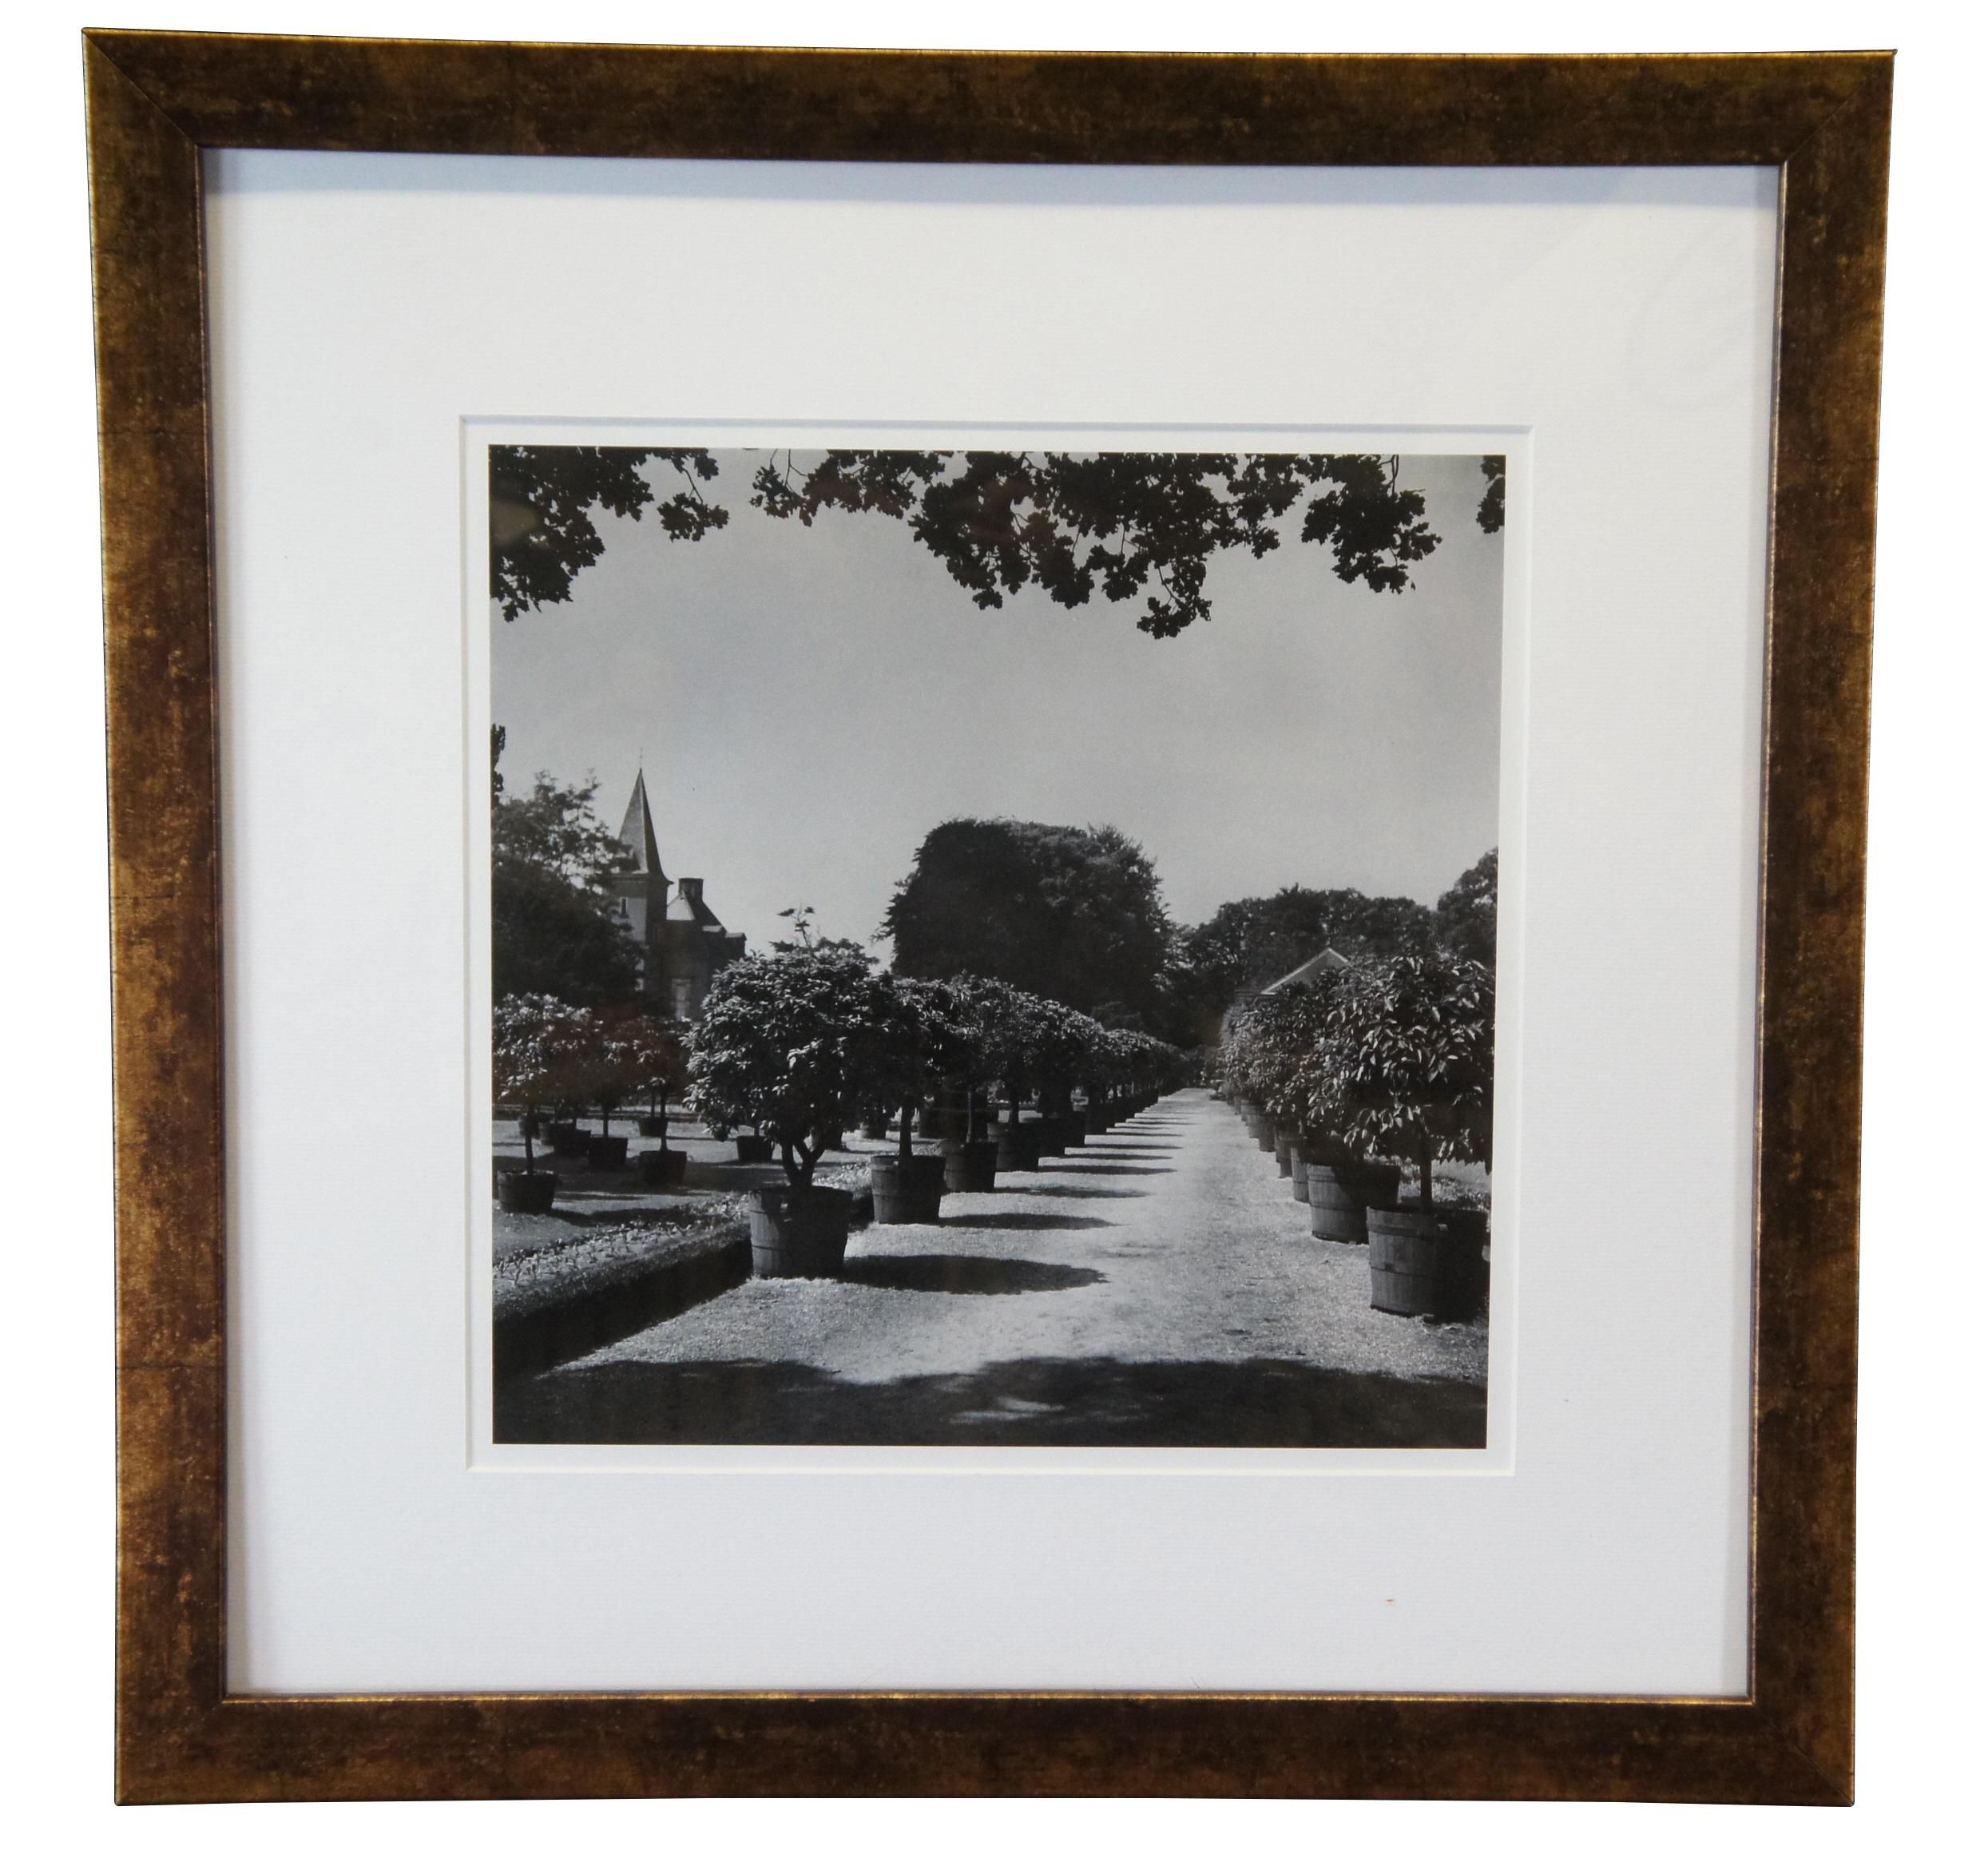 3 Vogue framed photographs 

A sculpture of a lion in a garden by Patrick Litchfield

The garden on a home in Meridian Hill Bath Towel BY Carola Rust

Gardens of Twickel Castle Art Print Constantin Joffe by Constantin Joffe

Dimensions:
20